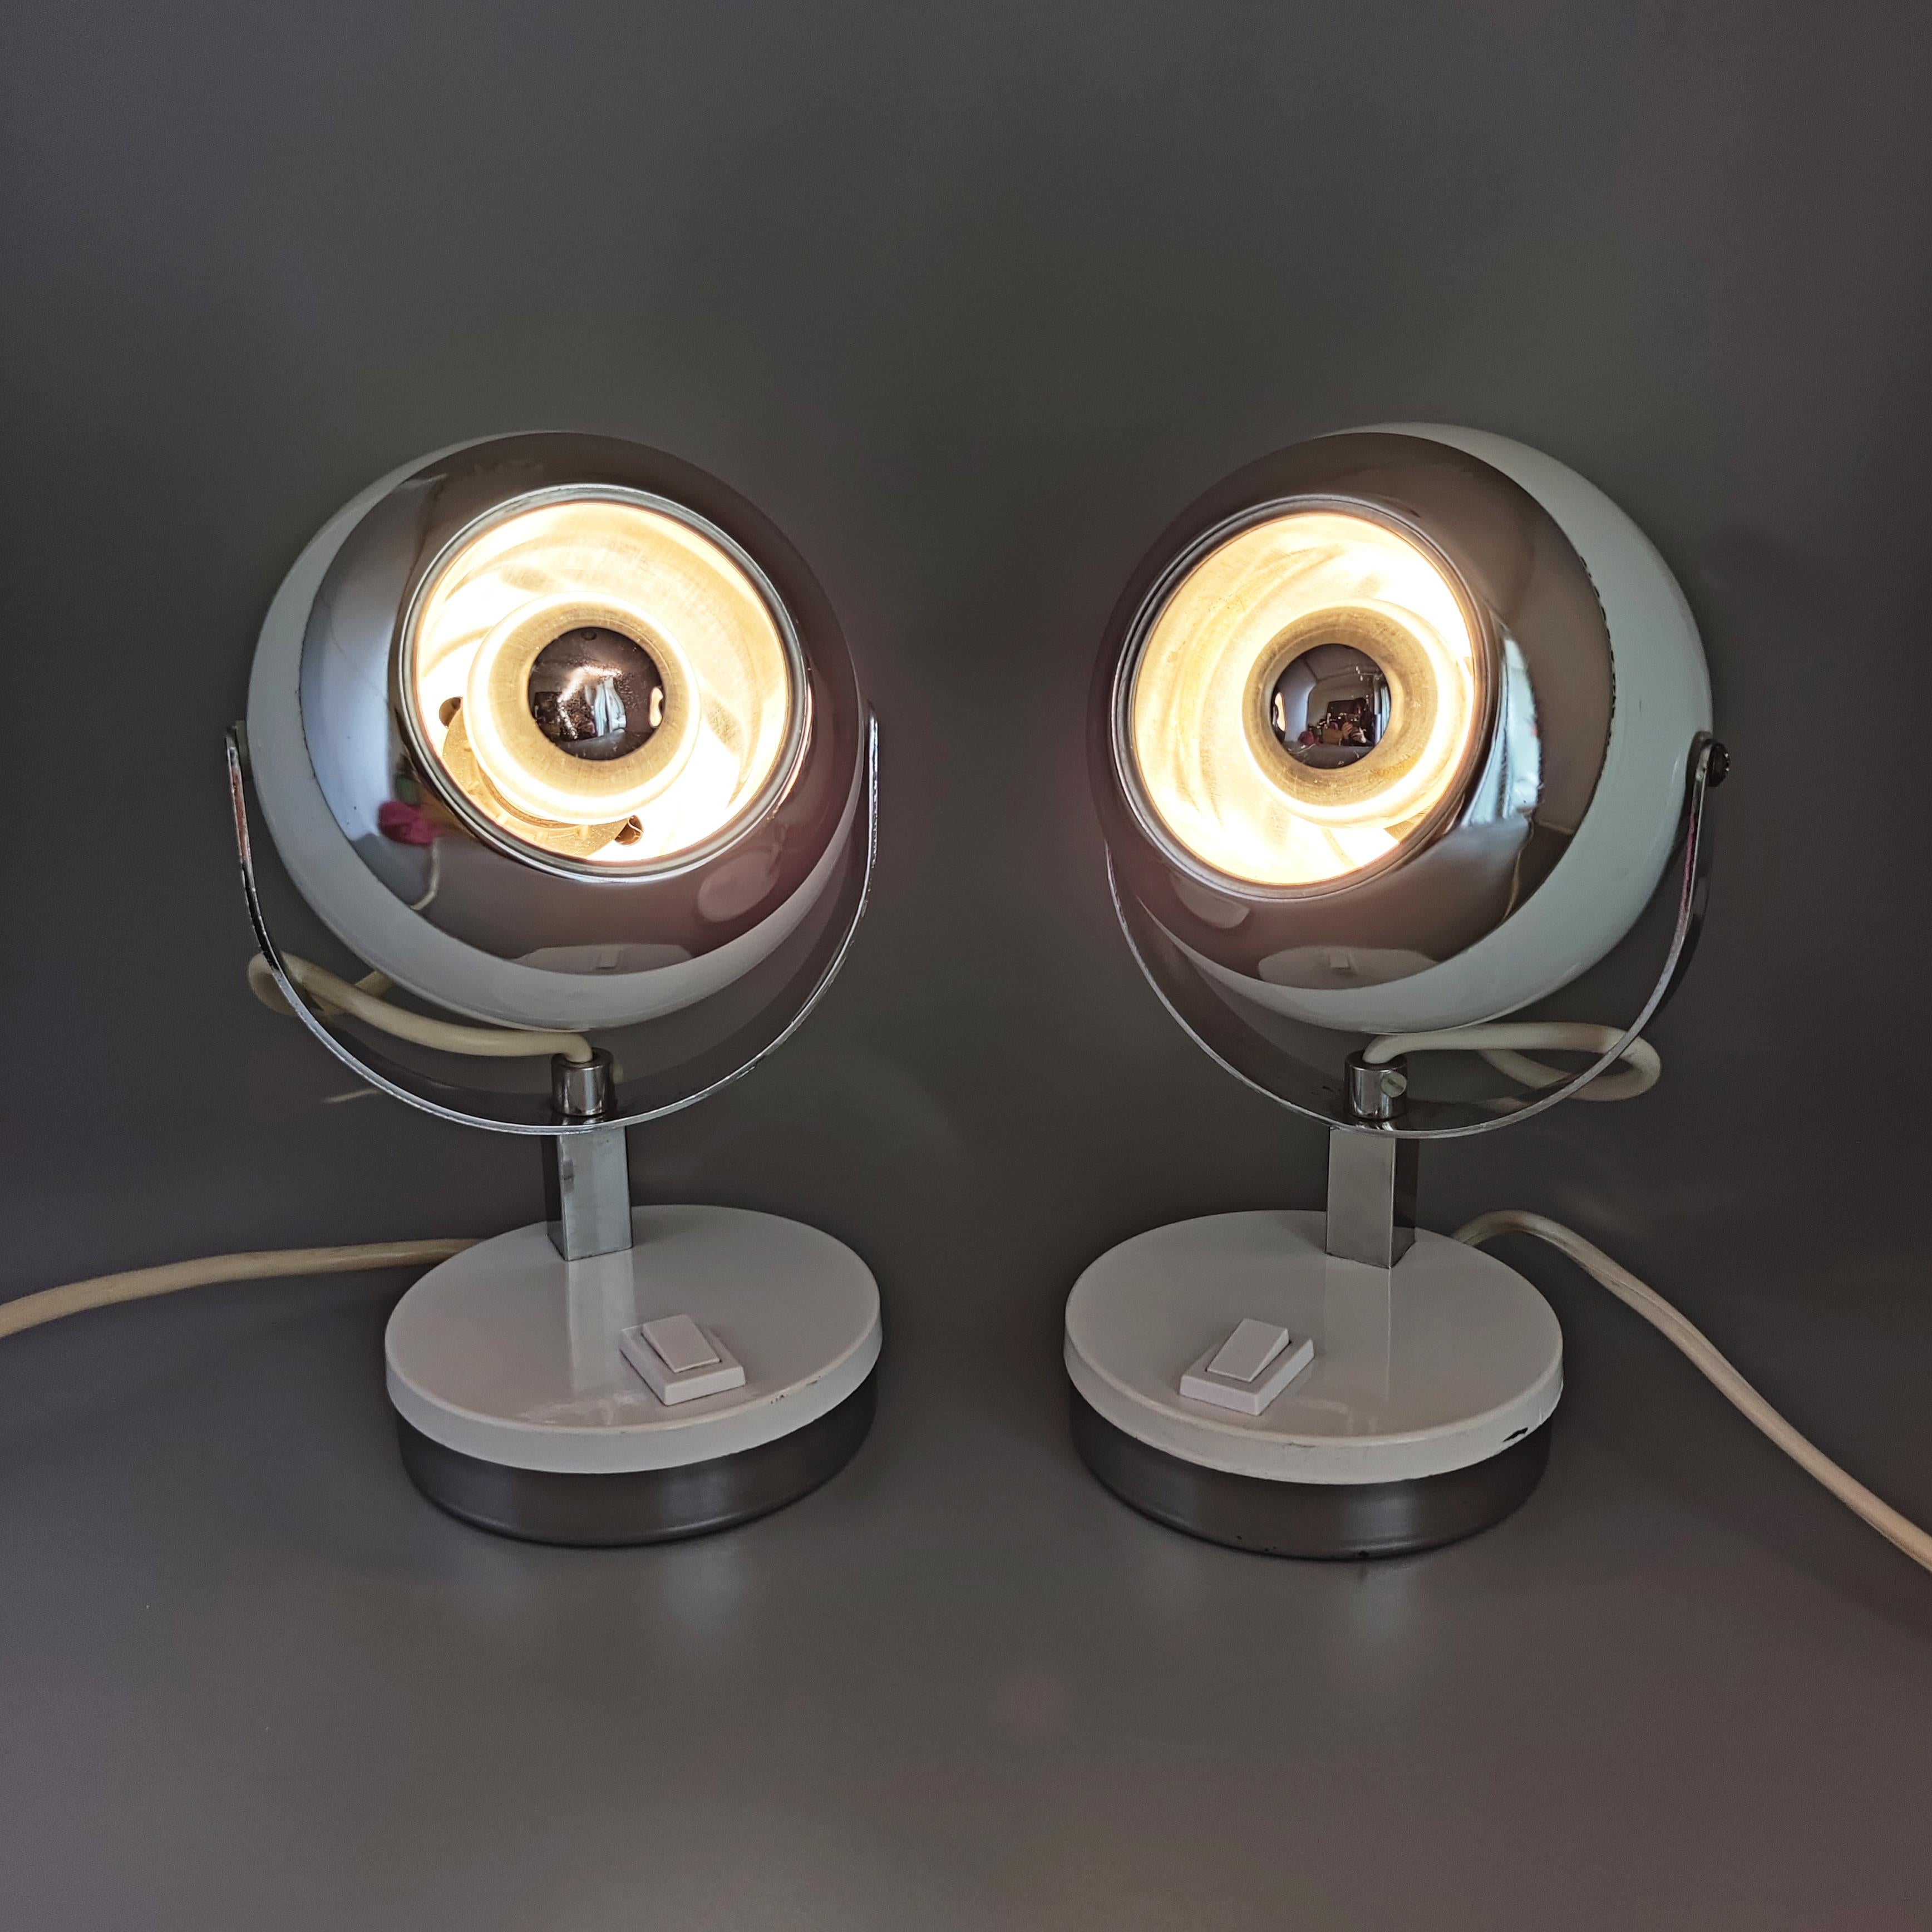 1970s Gorgeous Pair of White Eyeball Table Lamps by Veneta Lumi, Made in Italy For Sale 1